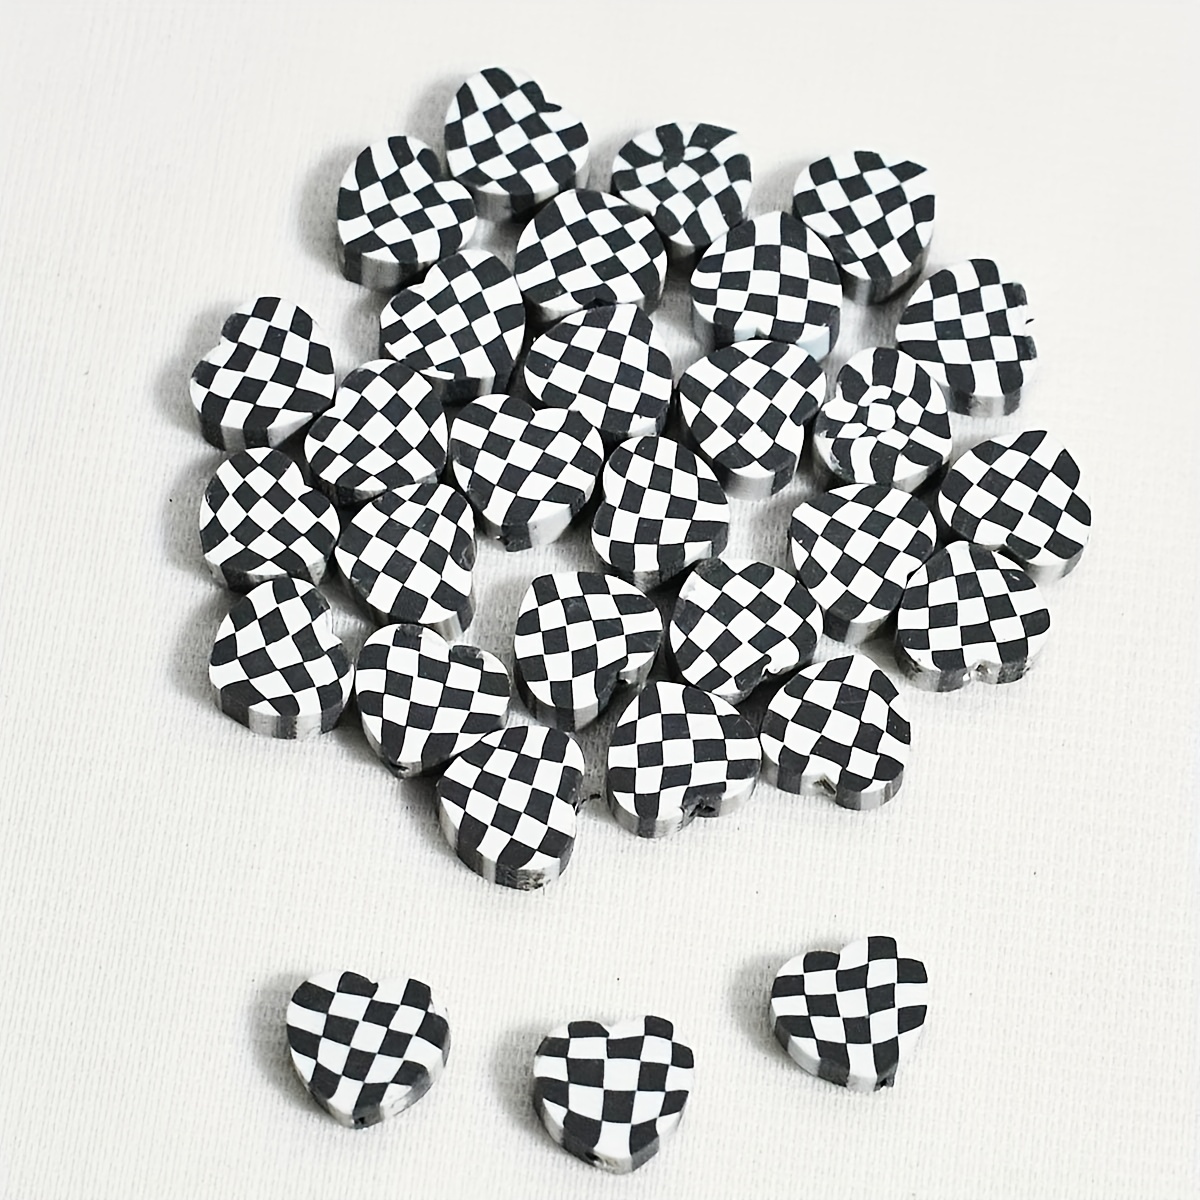 About 30pcs/Lot Black And White Checkerboard Pattern Square Polymer Clay  Loose Spacer Beads For Jewelry Making DIY Bracelet Bag Phone Key Charms  Craft